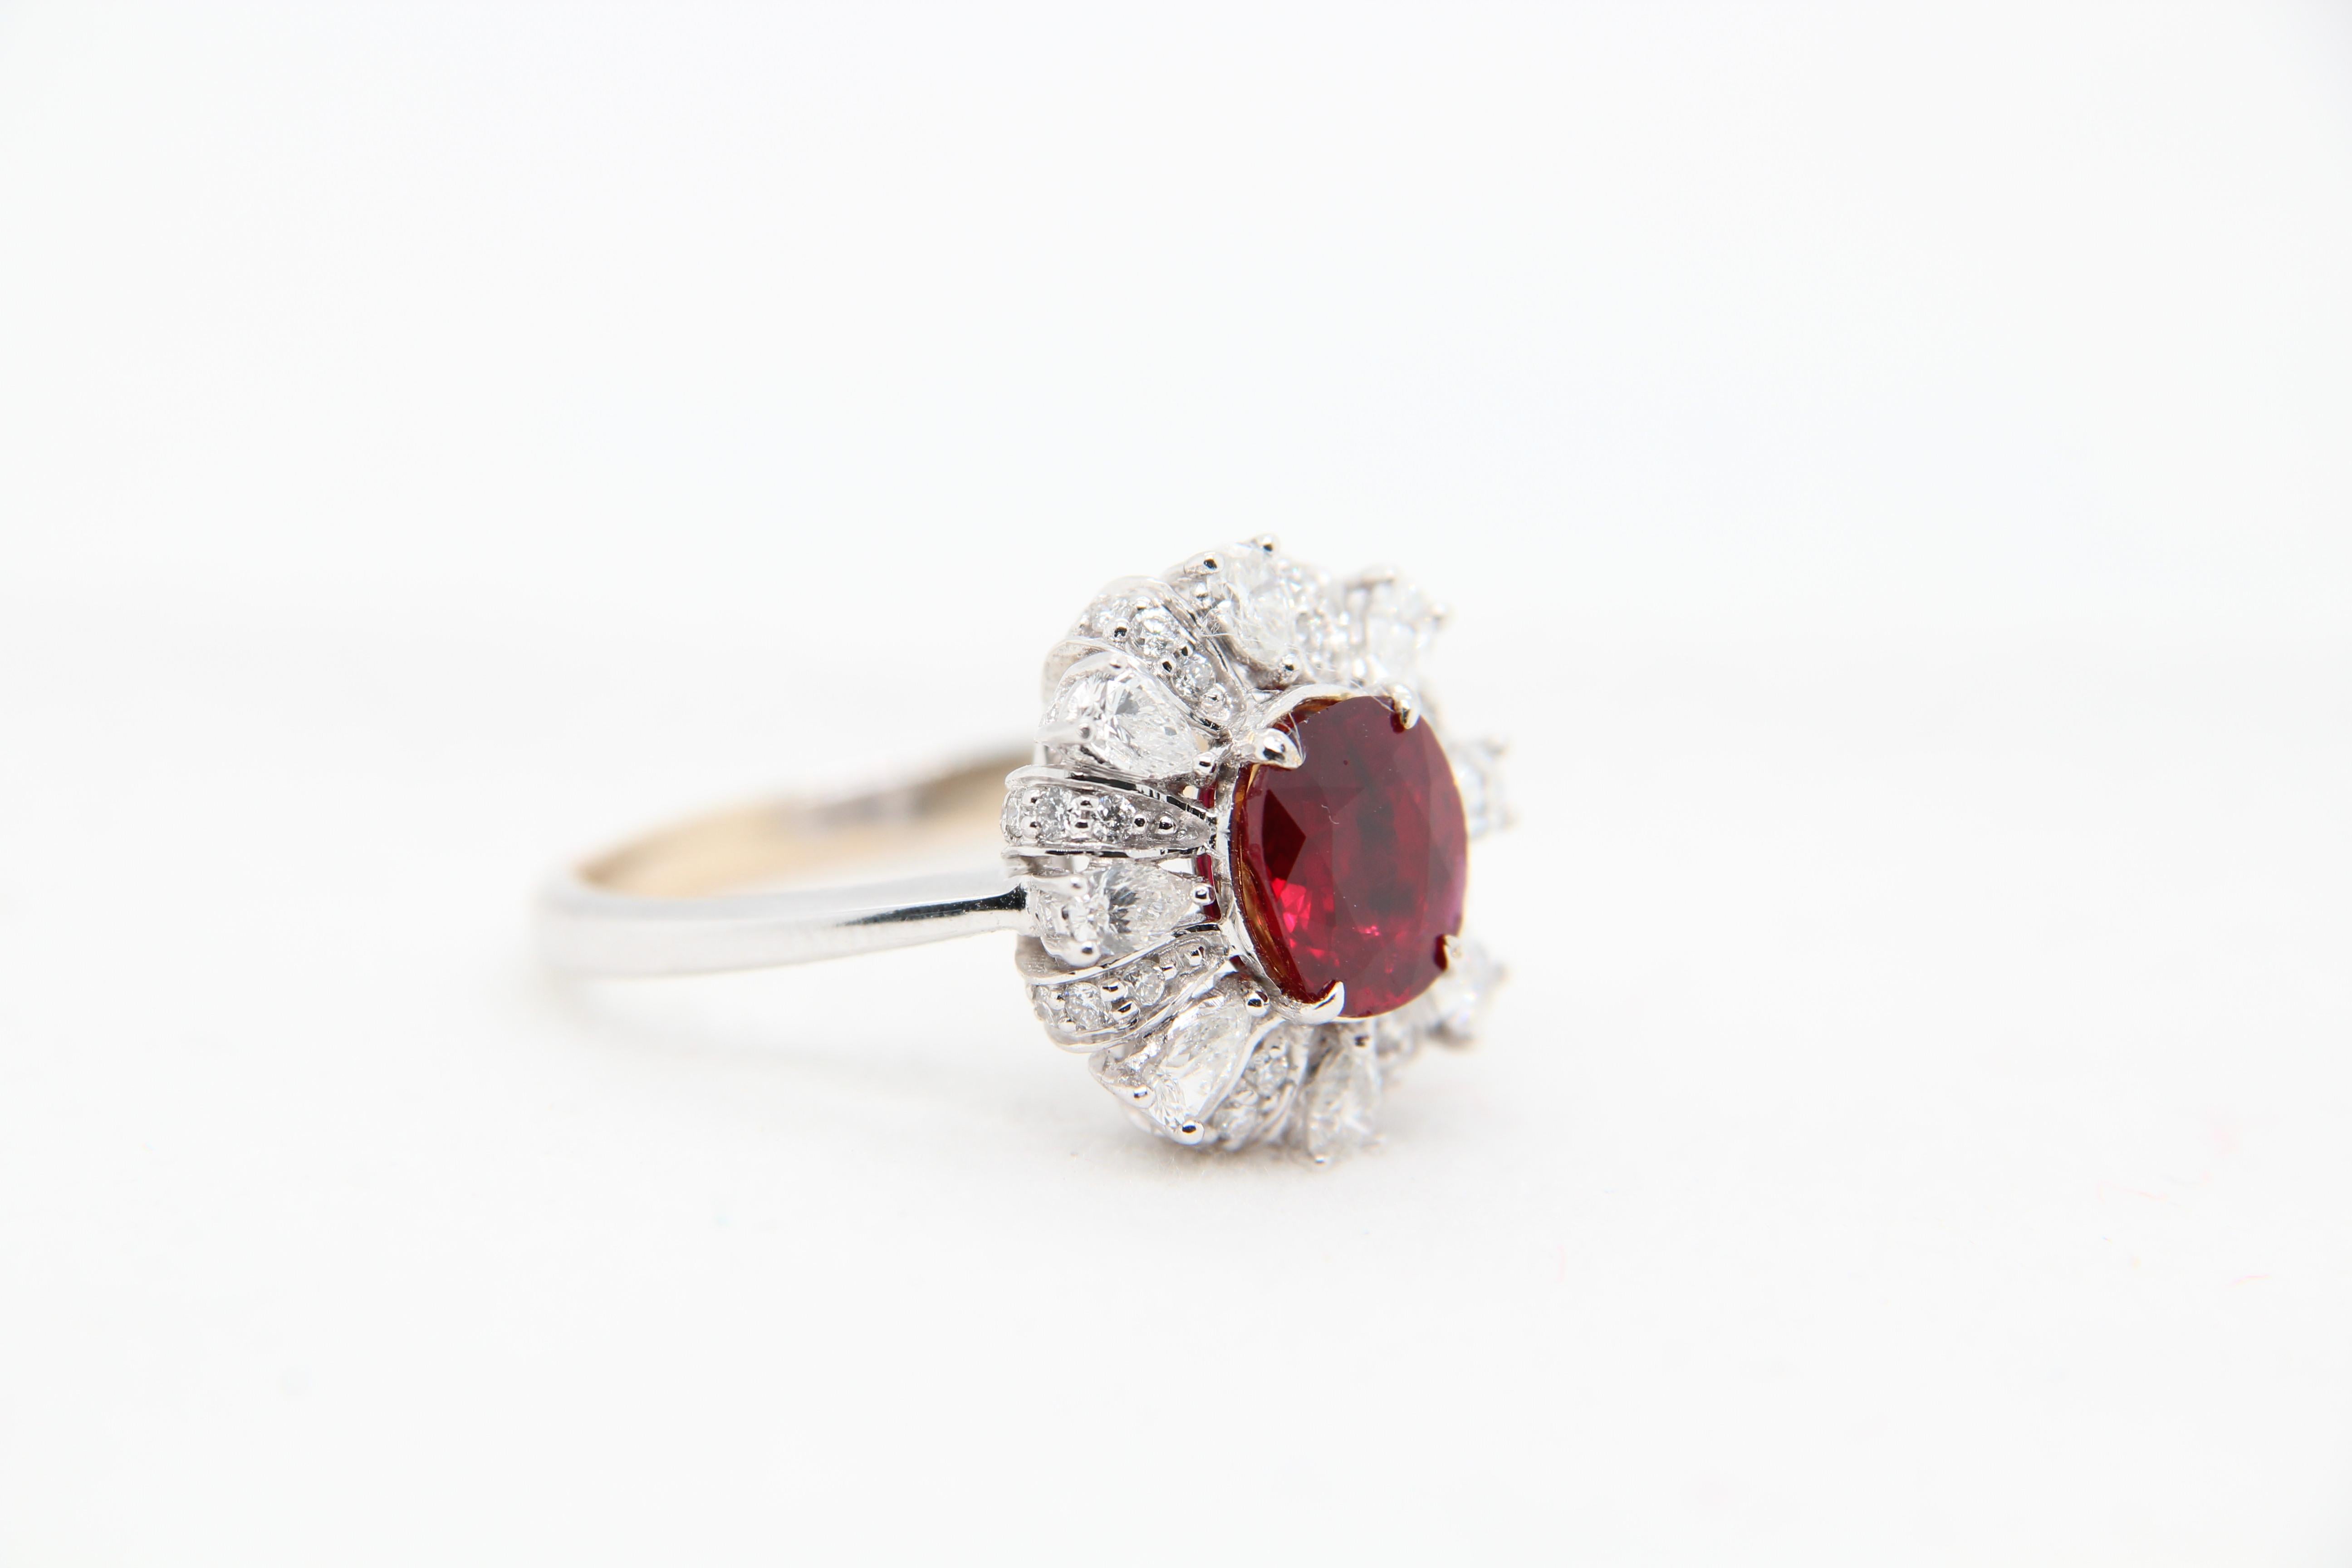 Ring made from Burmese unheated ruby and diamond. The ruby is of weight 1.48 carat and is certified by Gem Research Swisslab (GRS) unheated and 'Pigeon's Blood'. The ring is made in 18 karat gold. The total diamond weight is 0.86 carat.